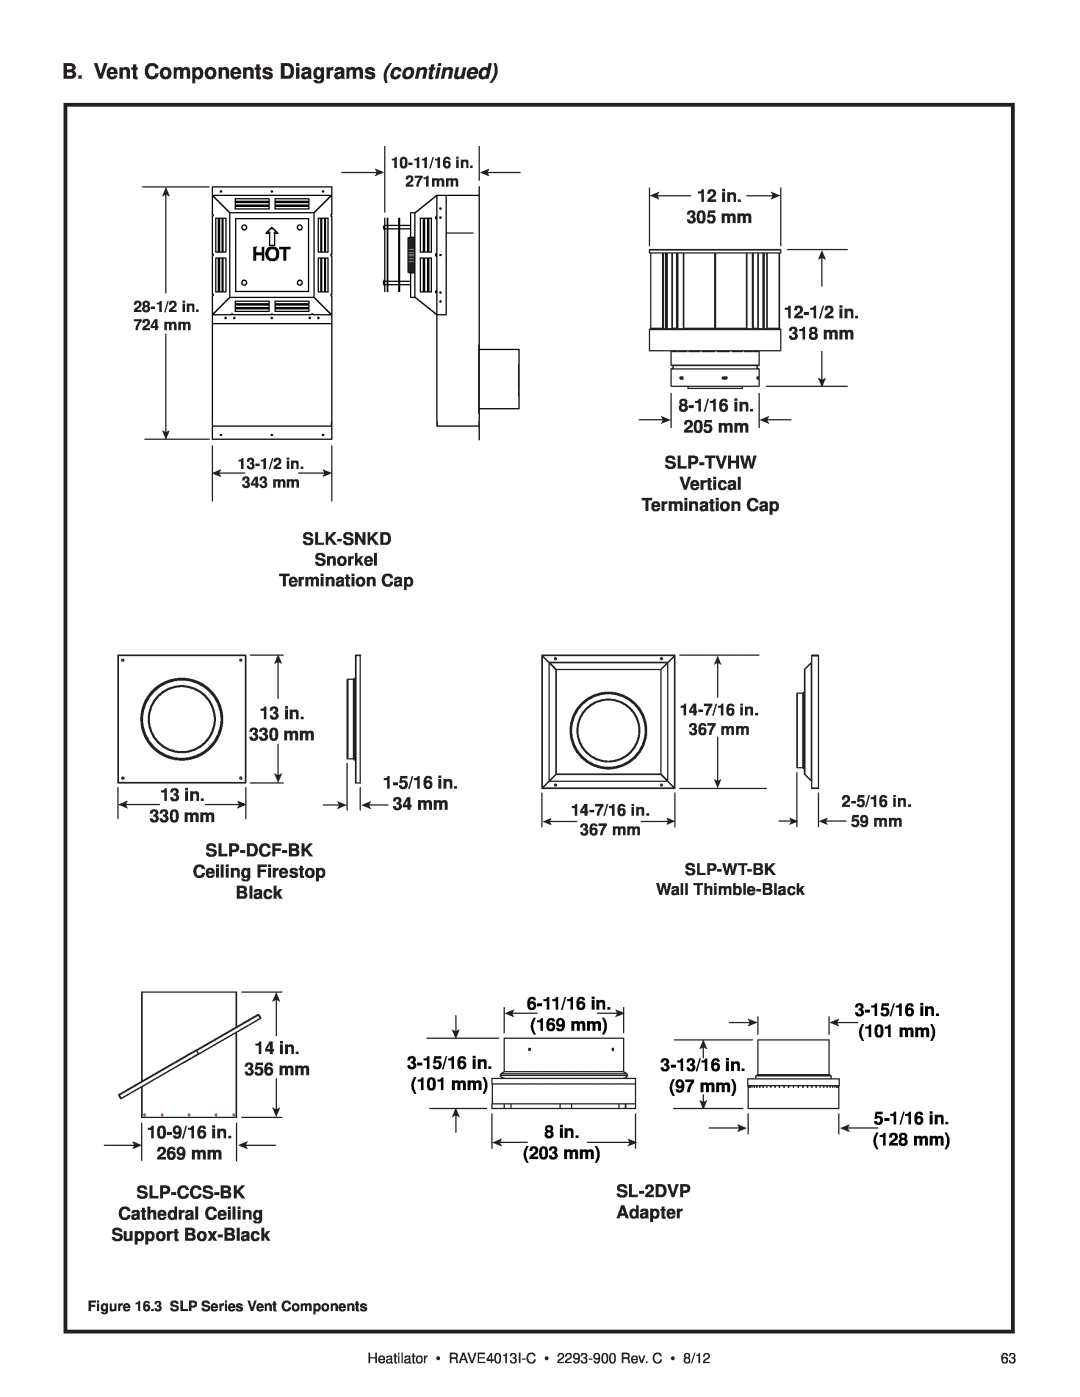 Heatiator Rave4013i-c B. Vent Components Diagrams continued, 6-11/16in, 3-15/16in, 169 mm, 101 mm, 3-13/16in, 97 mm, 8 in 